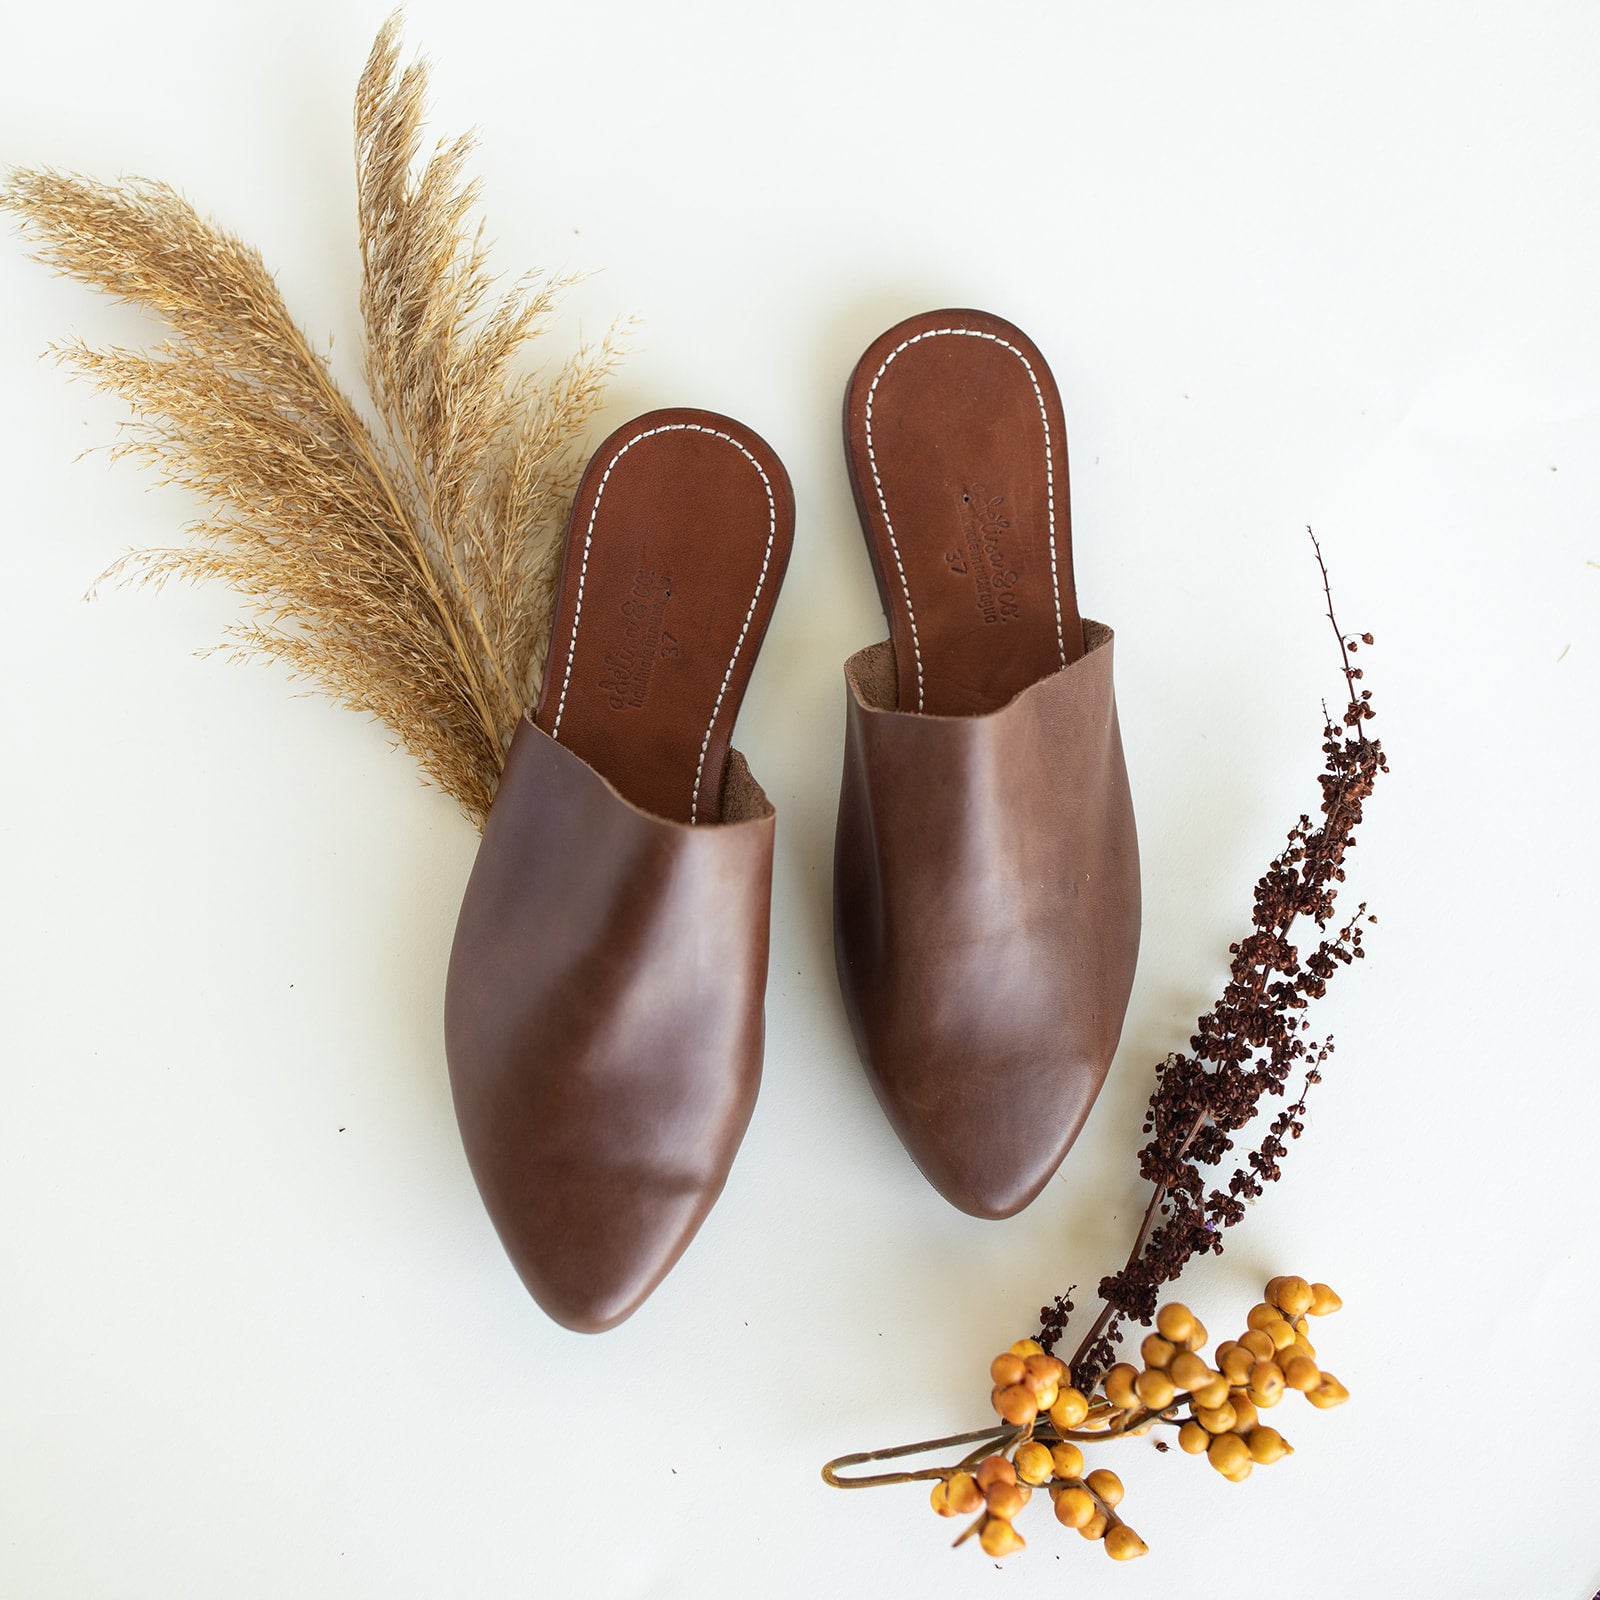 Adelisa & Co leather Mule shoe for women available in black, dark brown and medium brown.